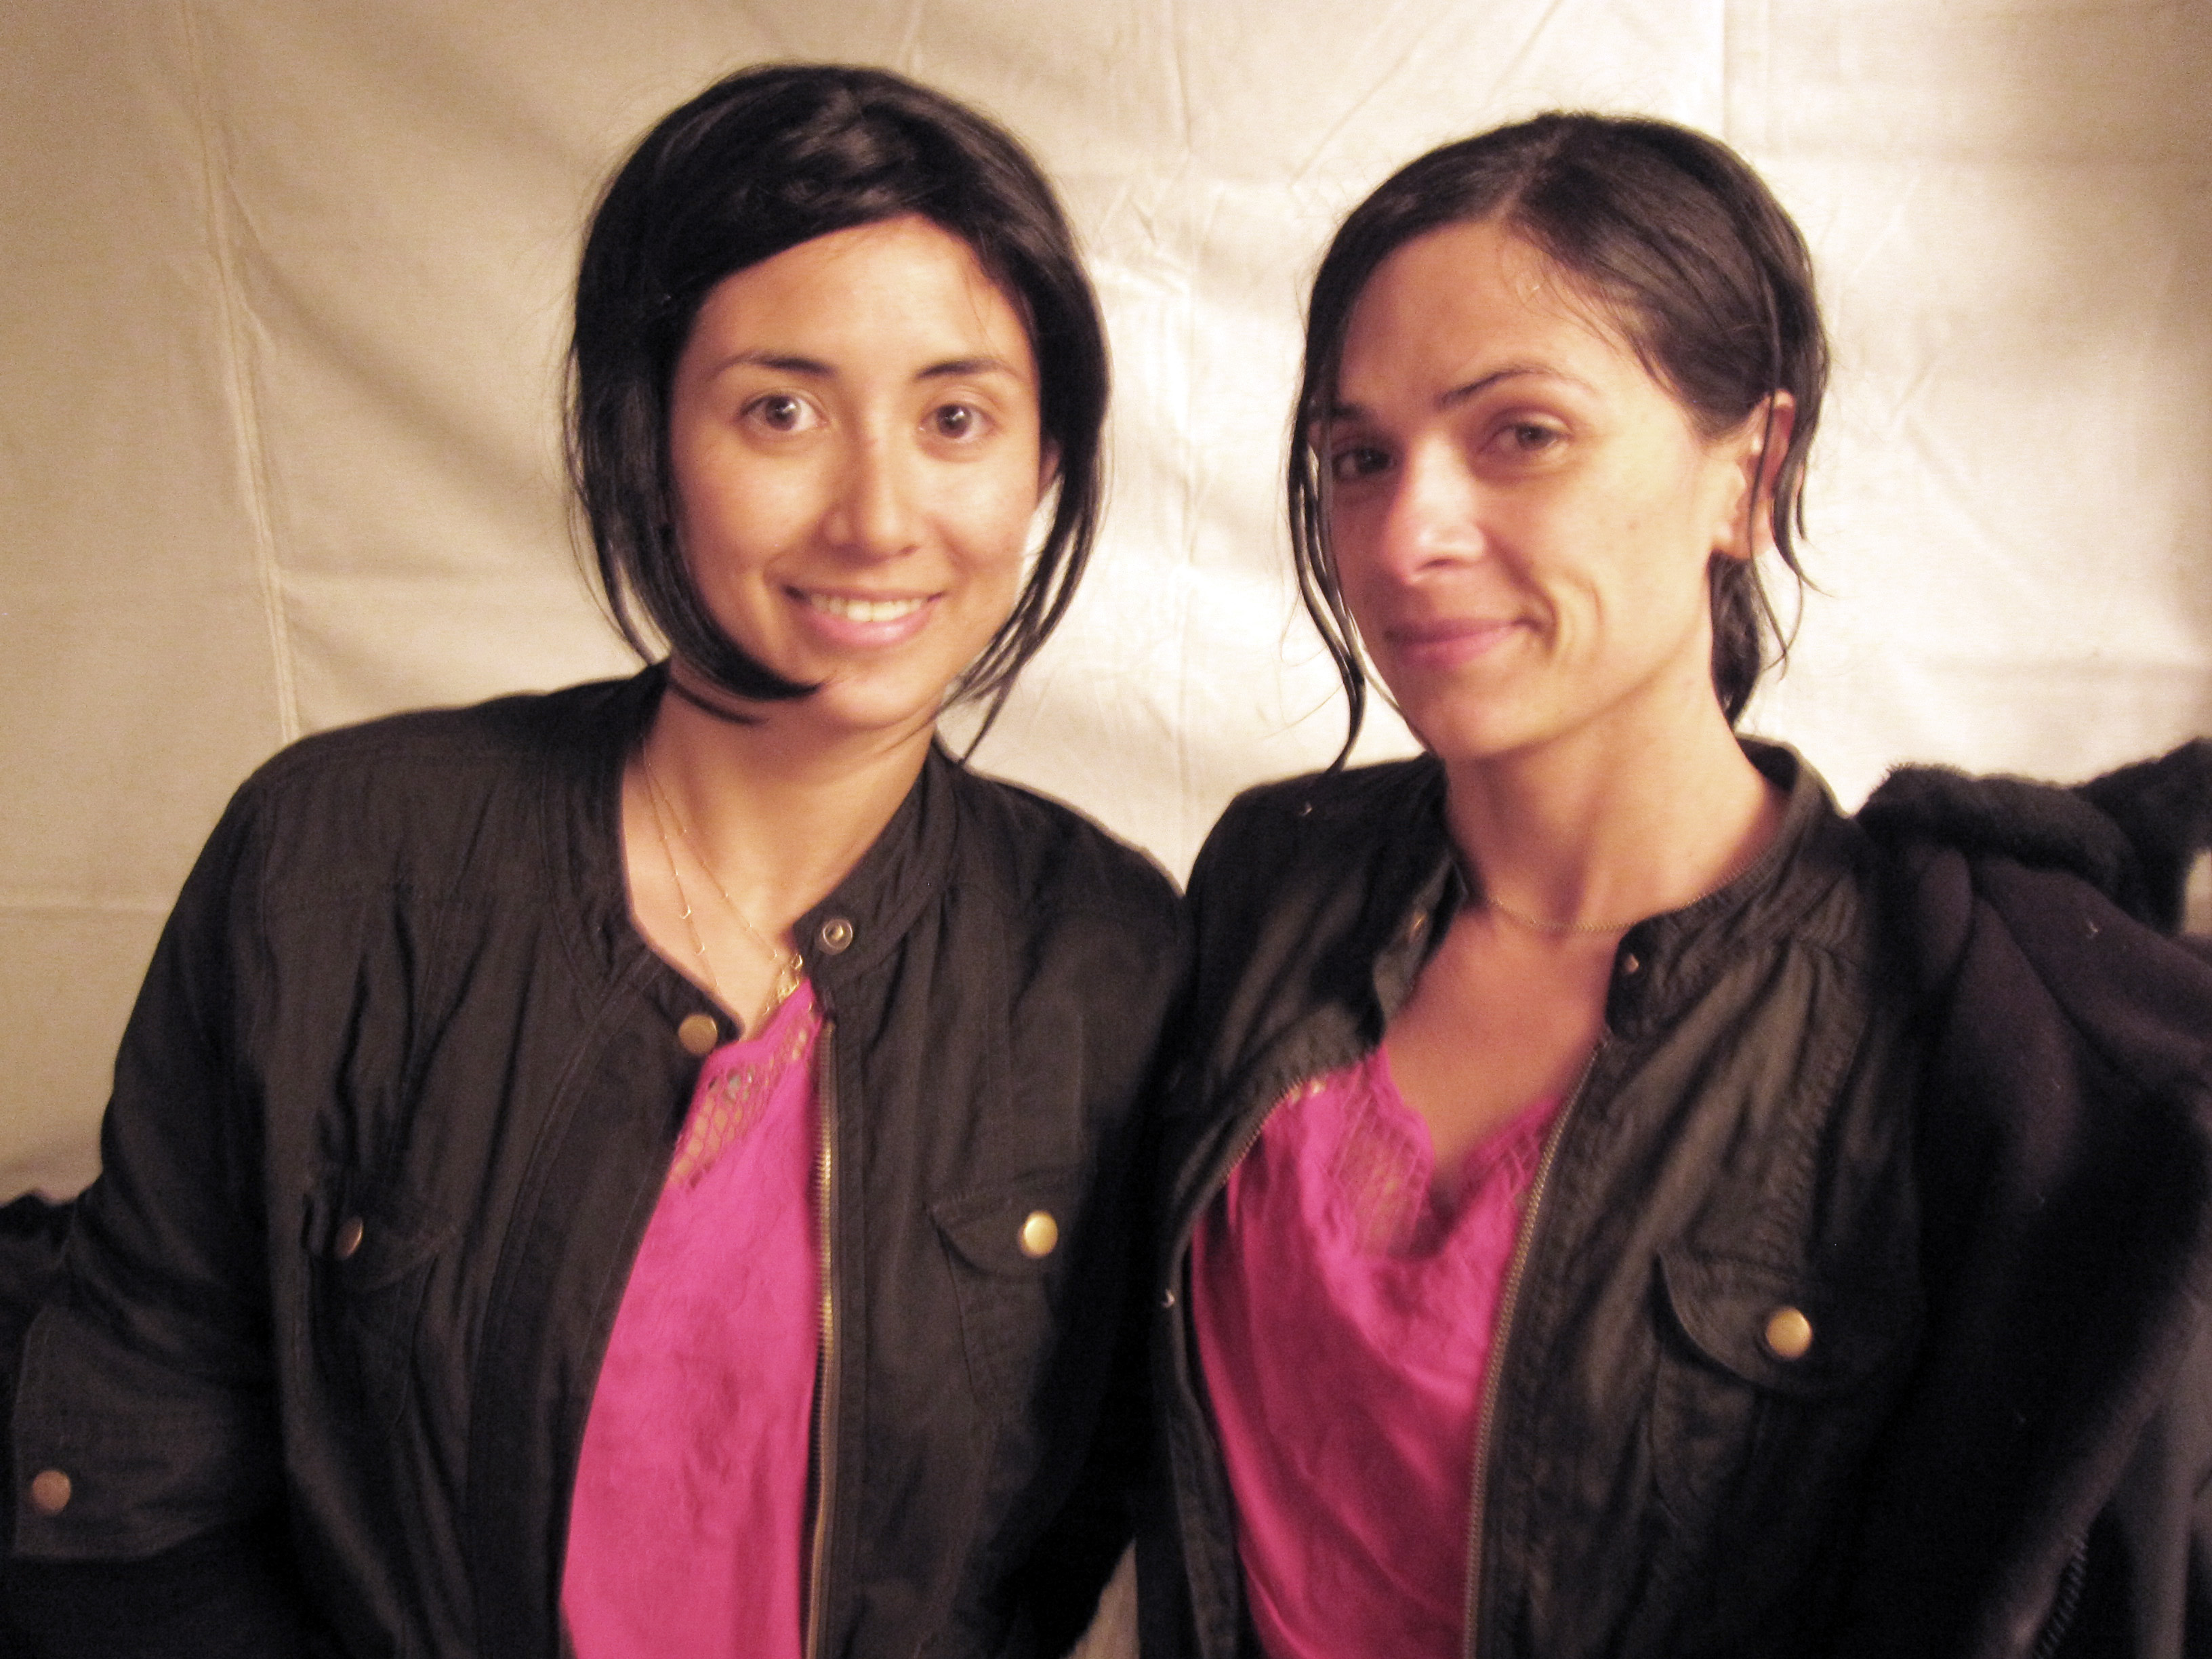 Stunt doubling Alexandra Barreto for the TV show Justified.